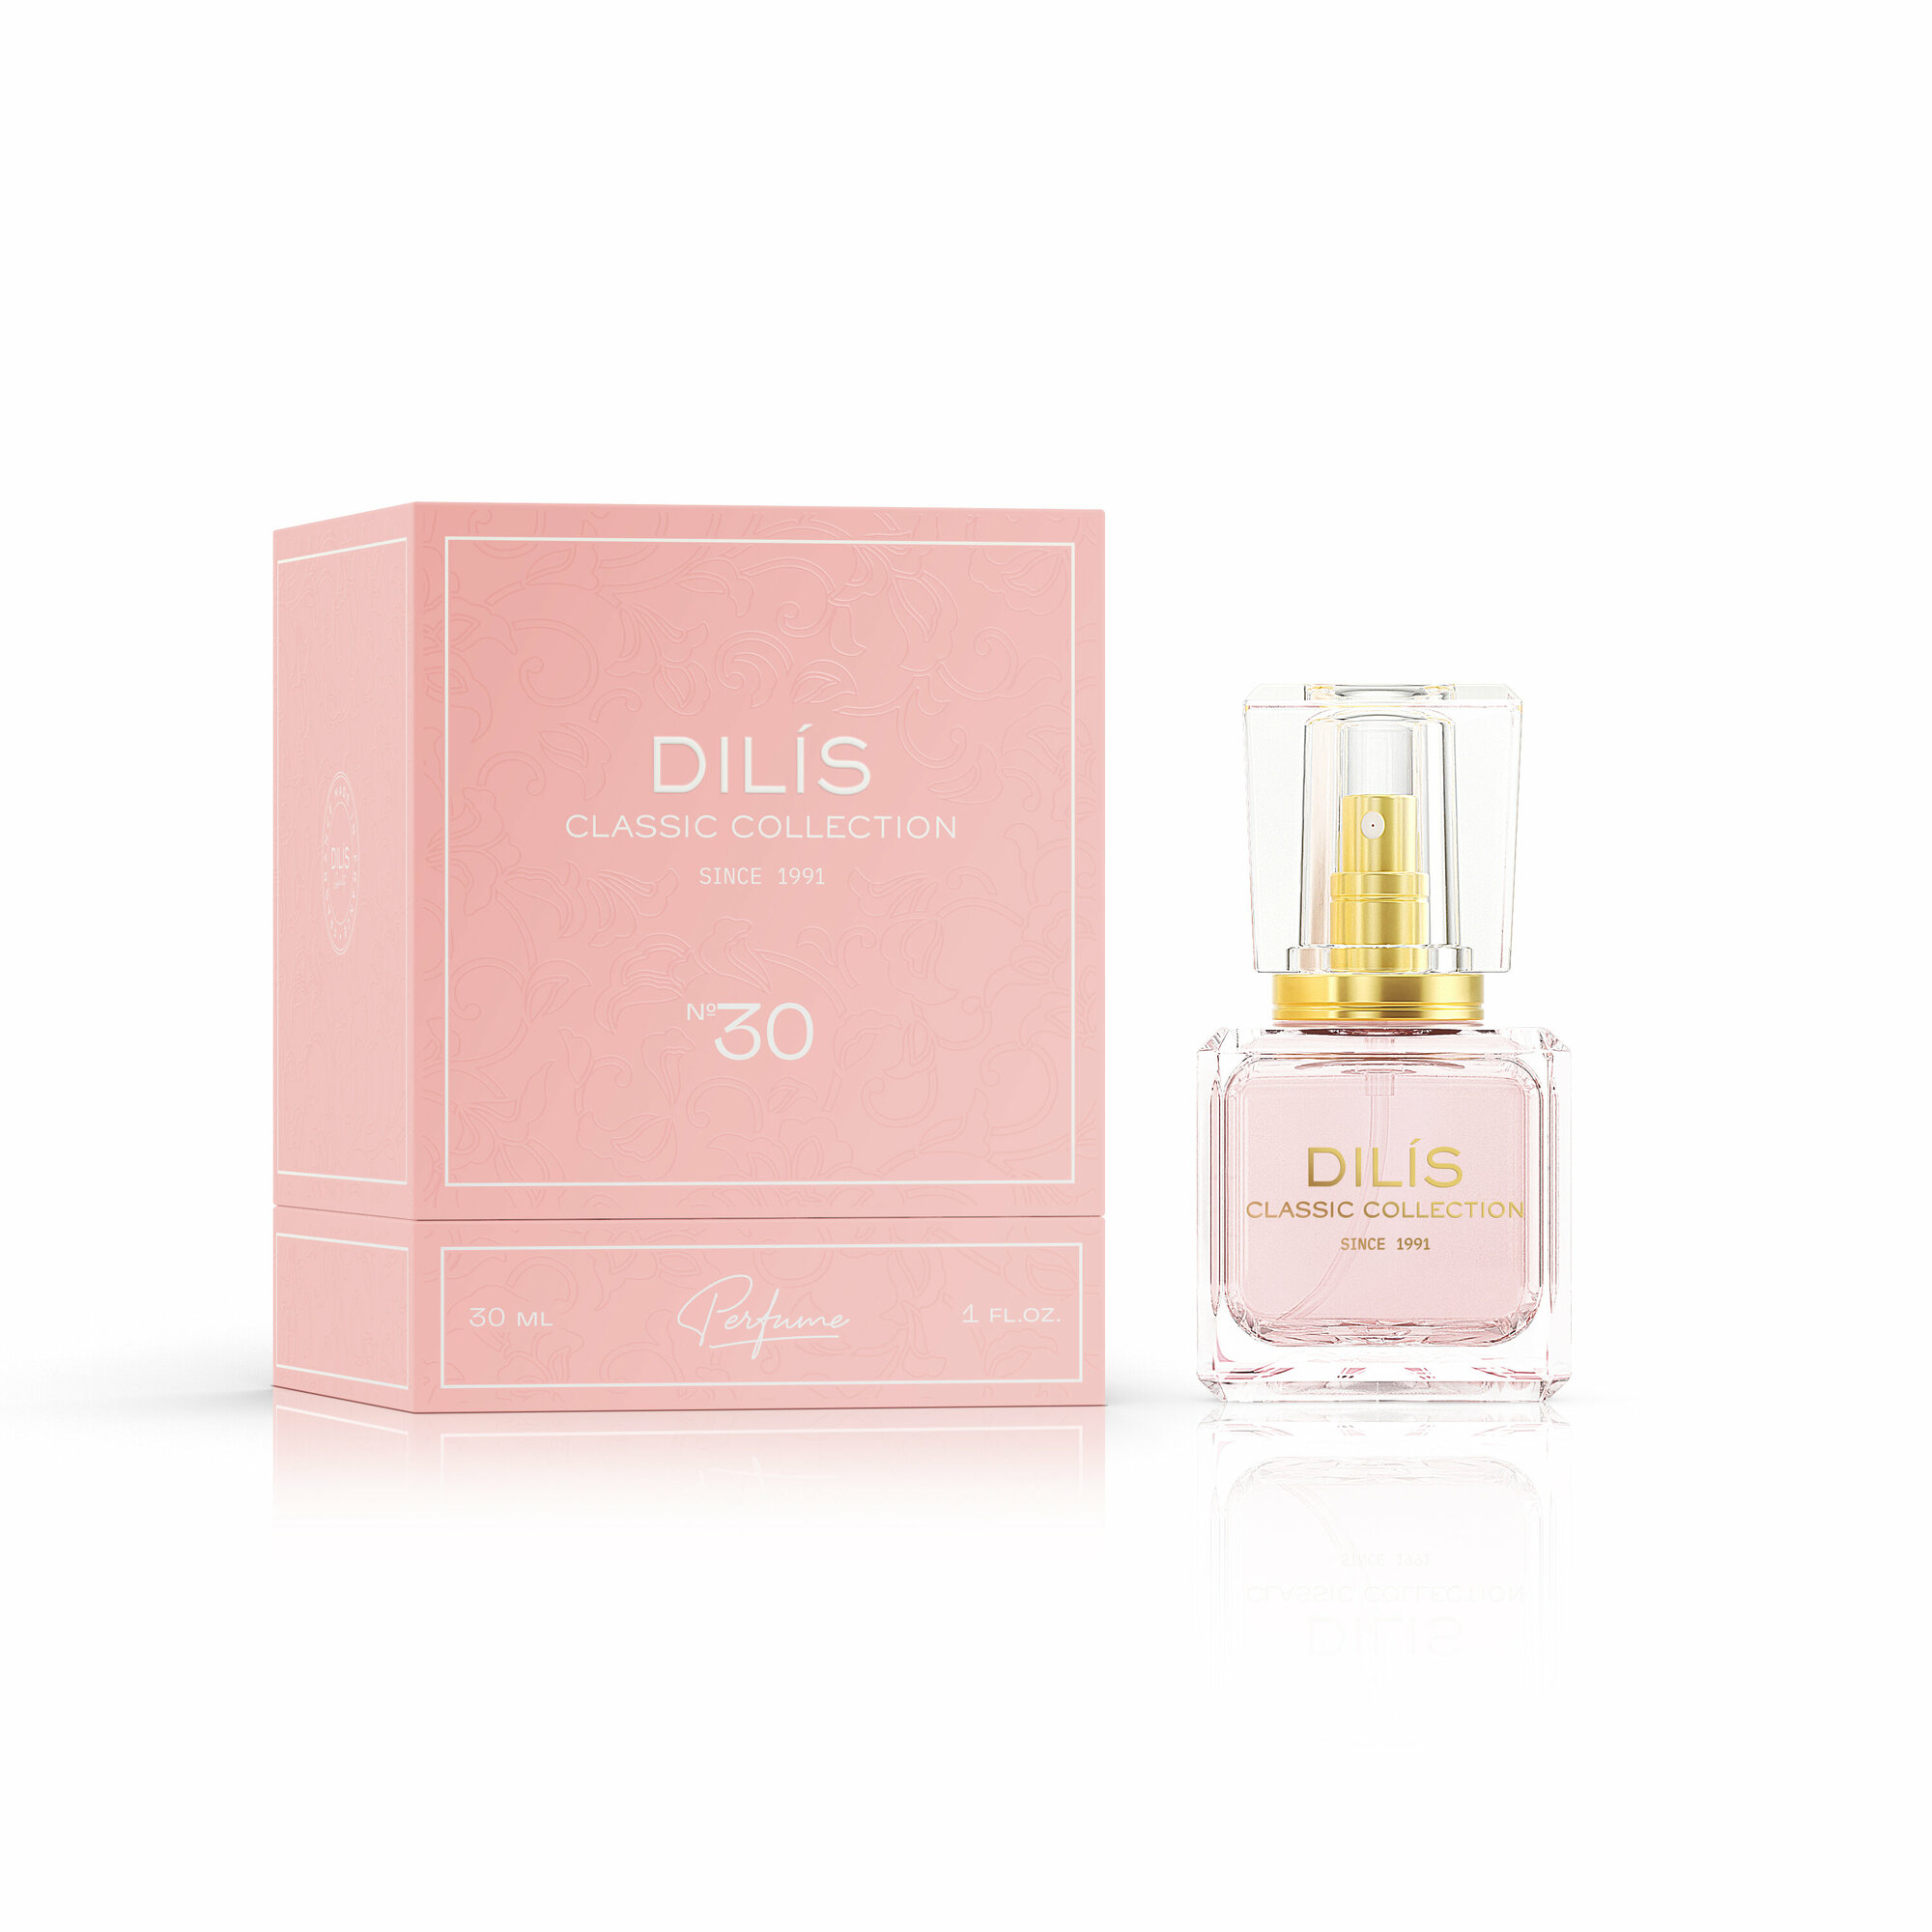 Духи Dilis Classic Collection N30, 30мл